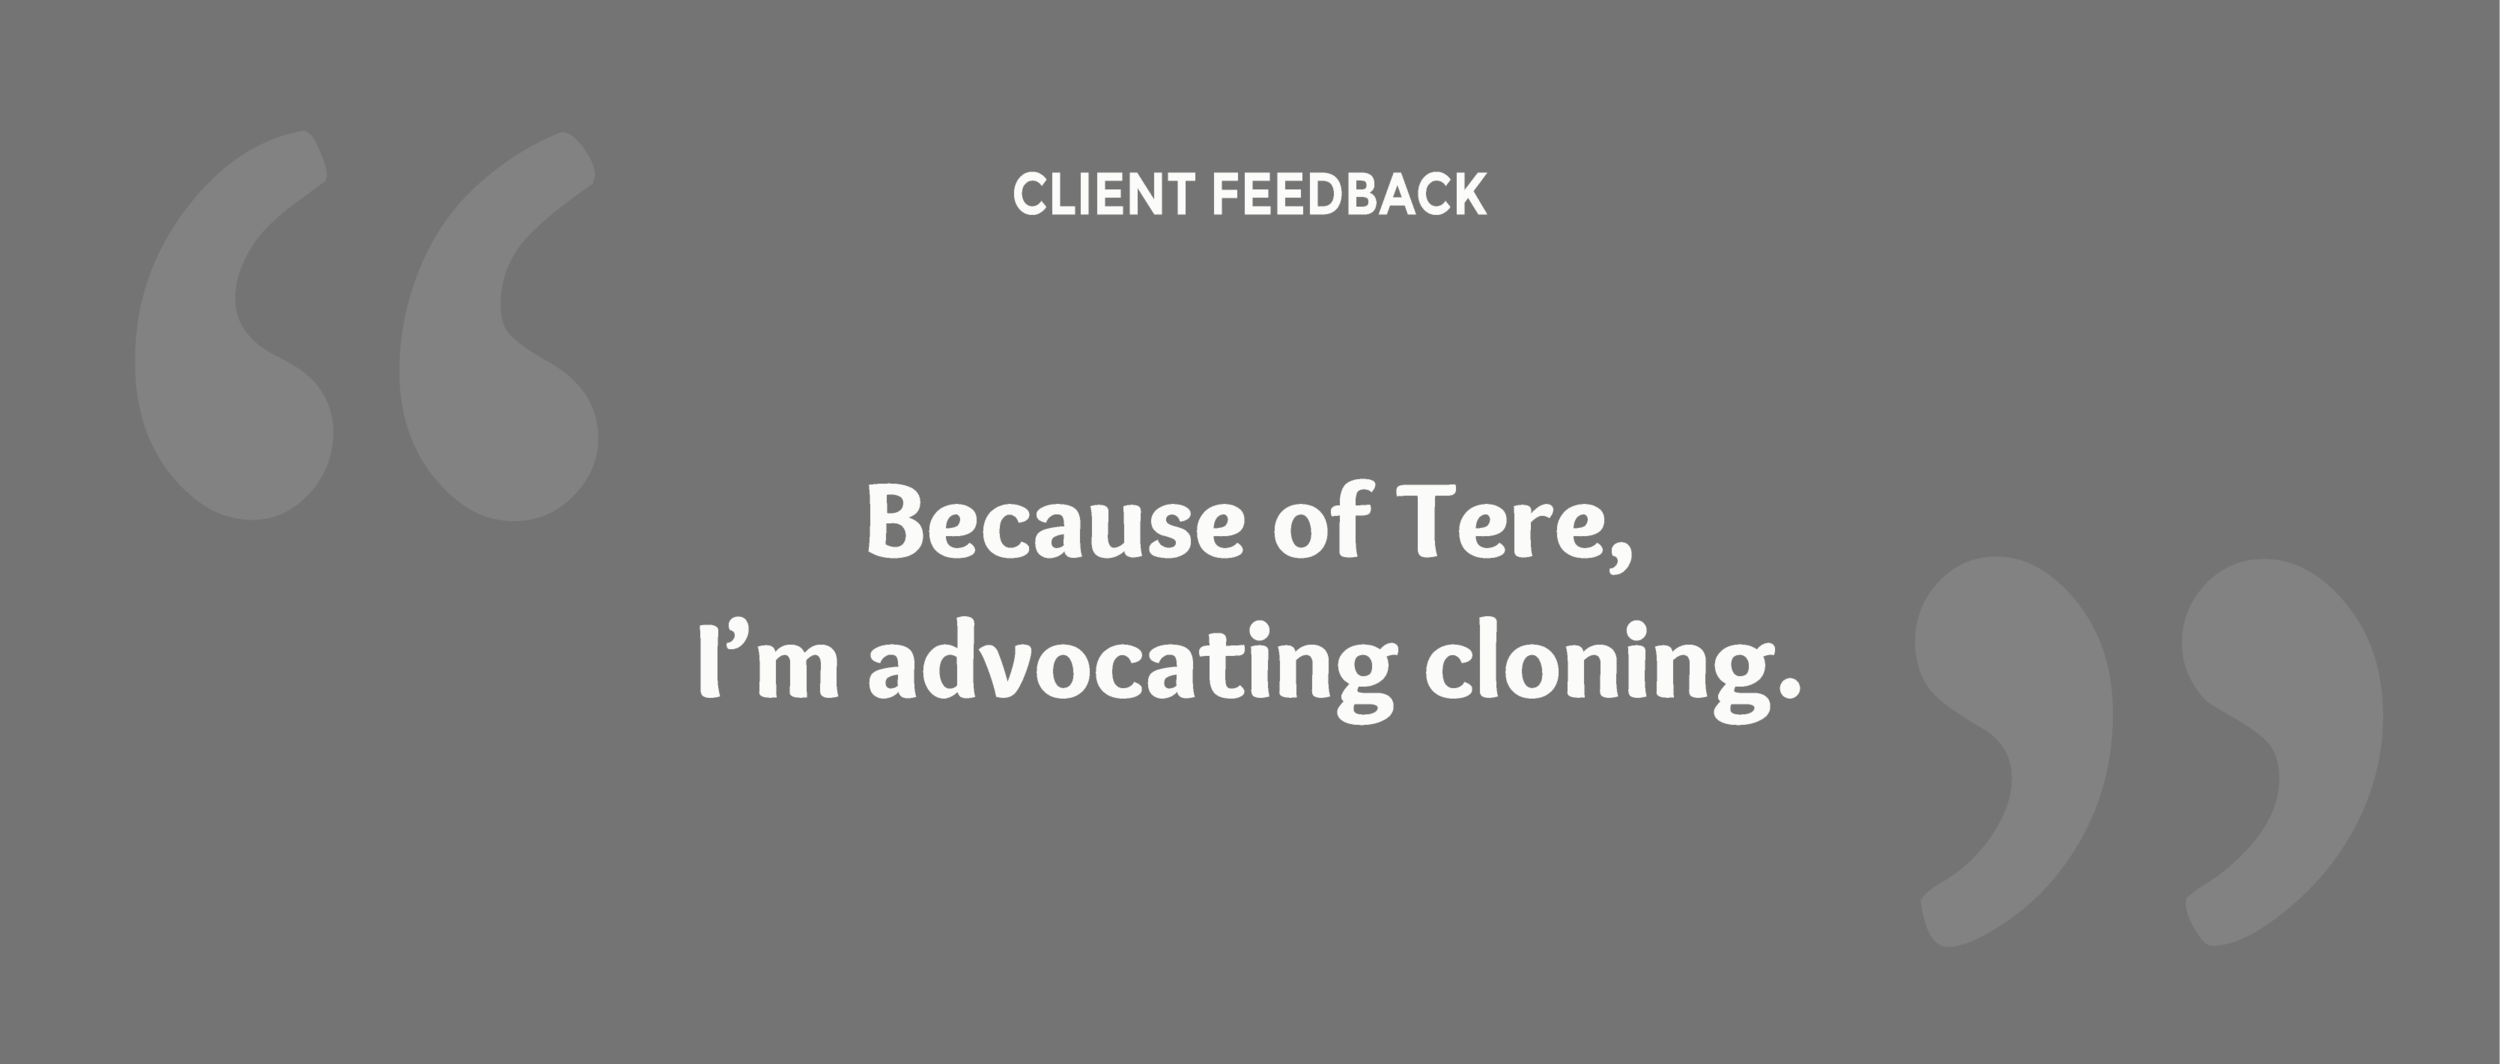 about-client-feedback1.png